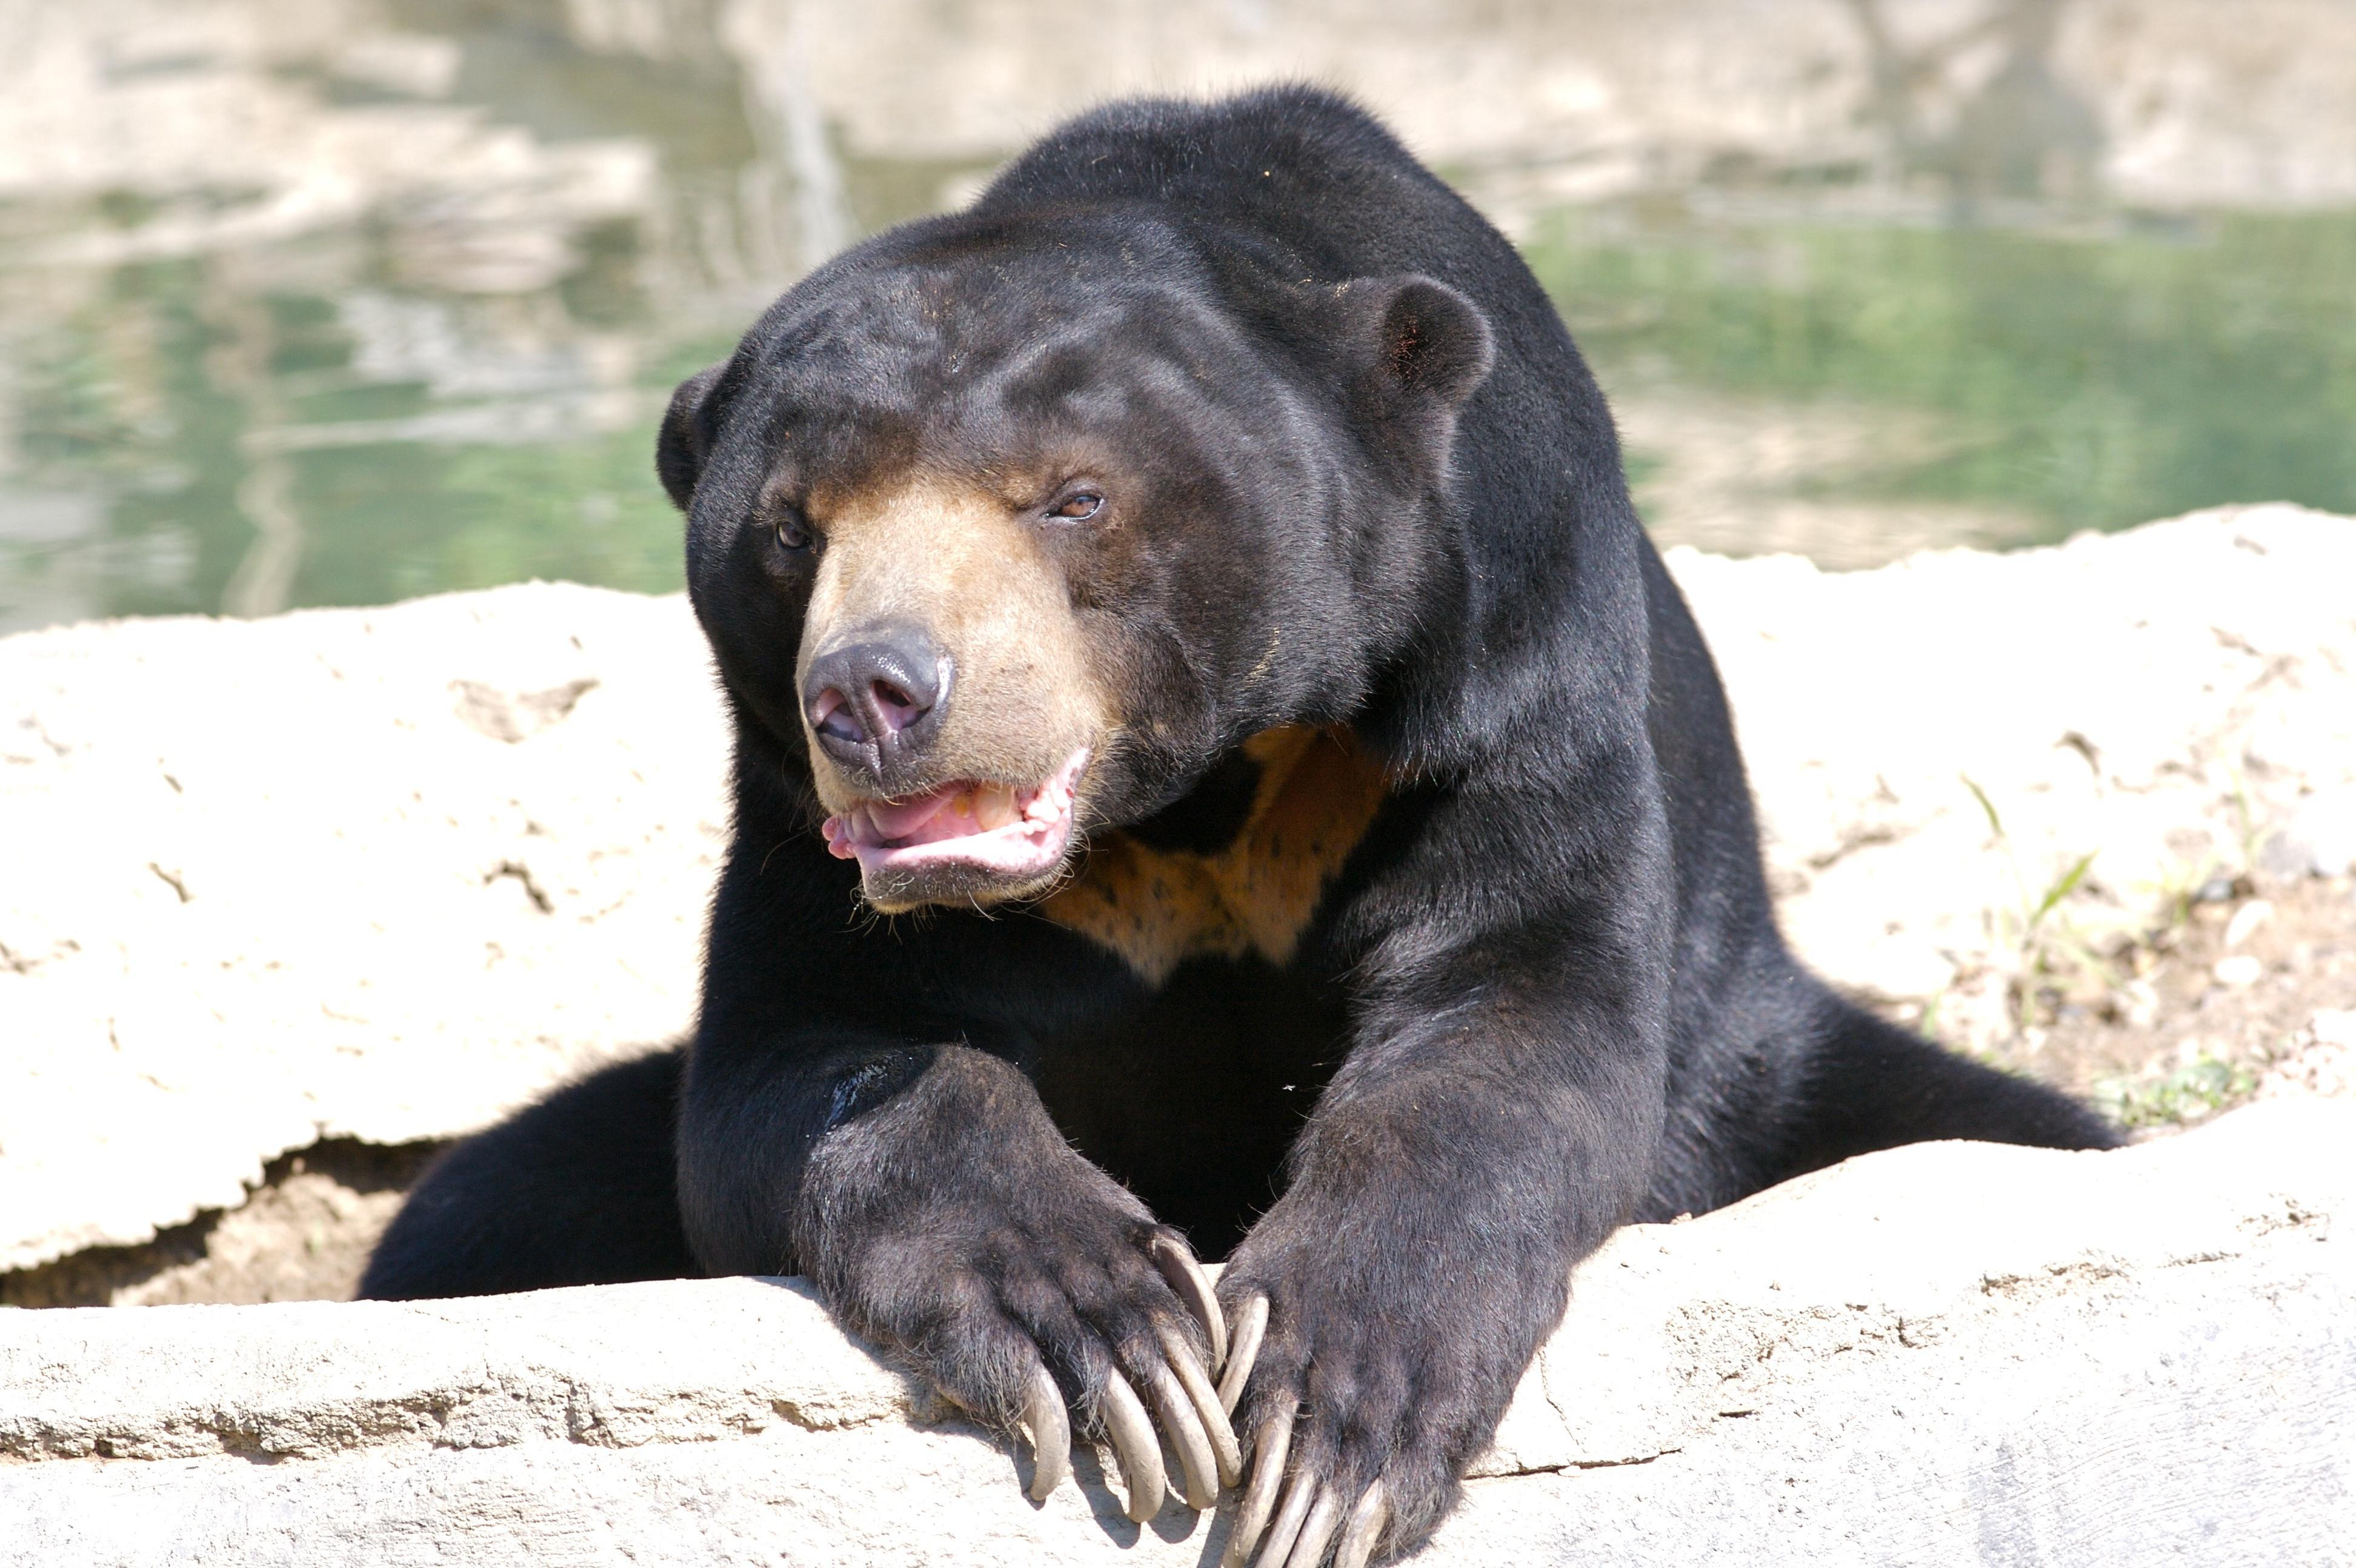 Sun Bear Wallpaper Image Photo Picture Background